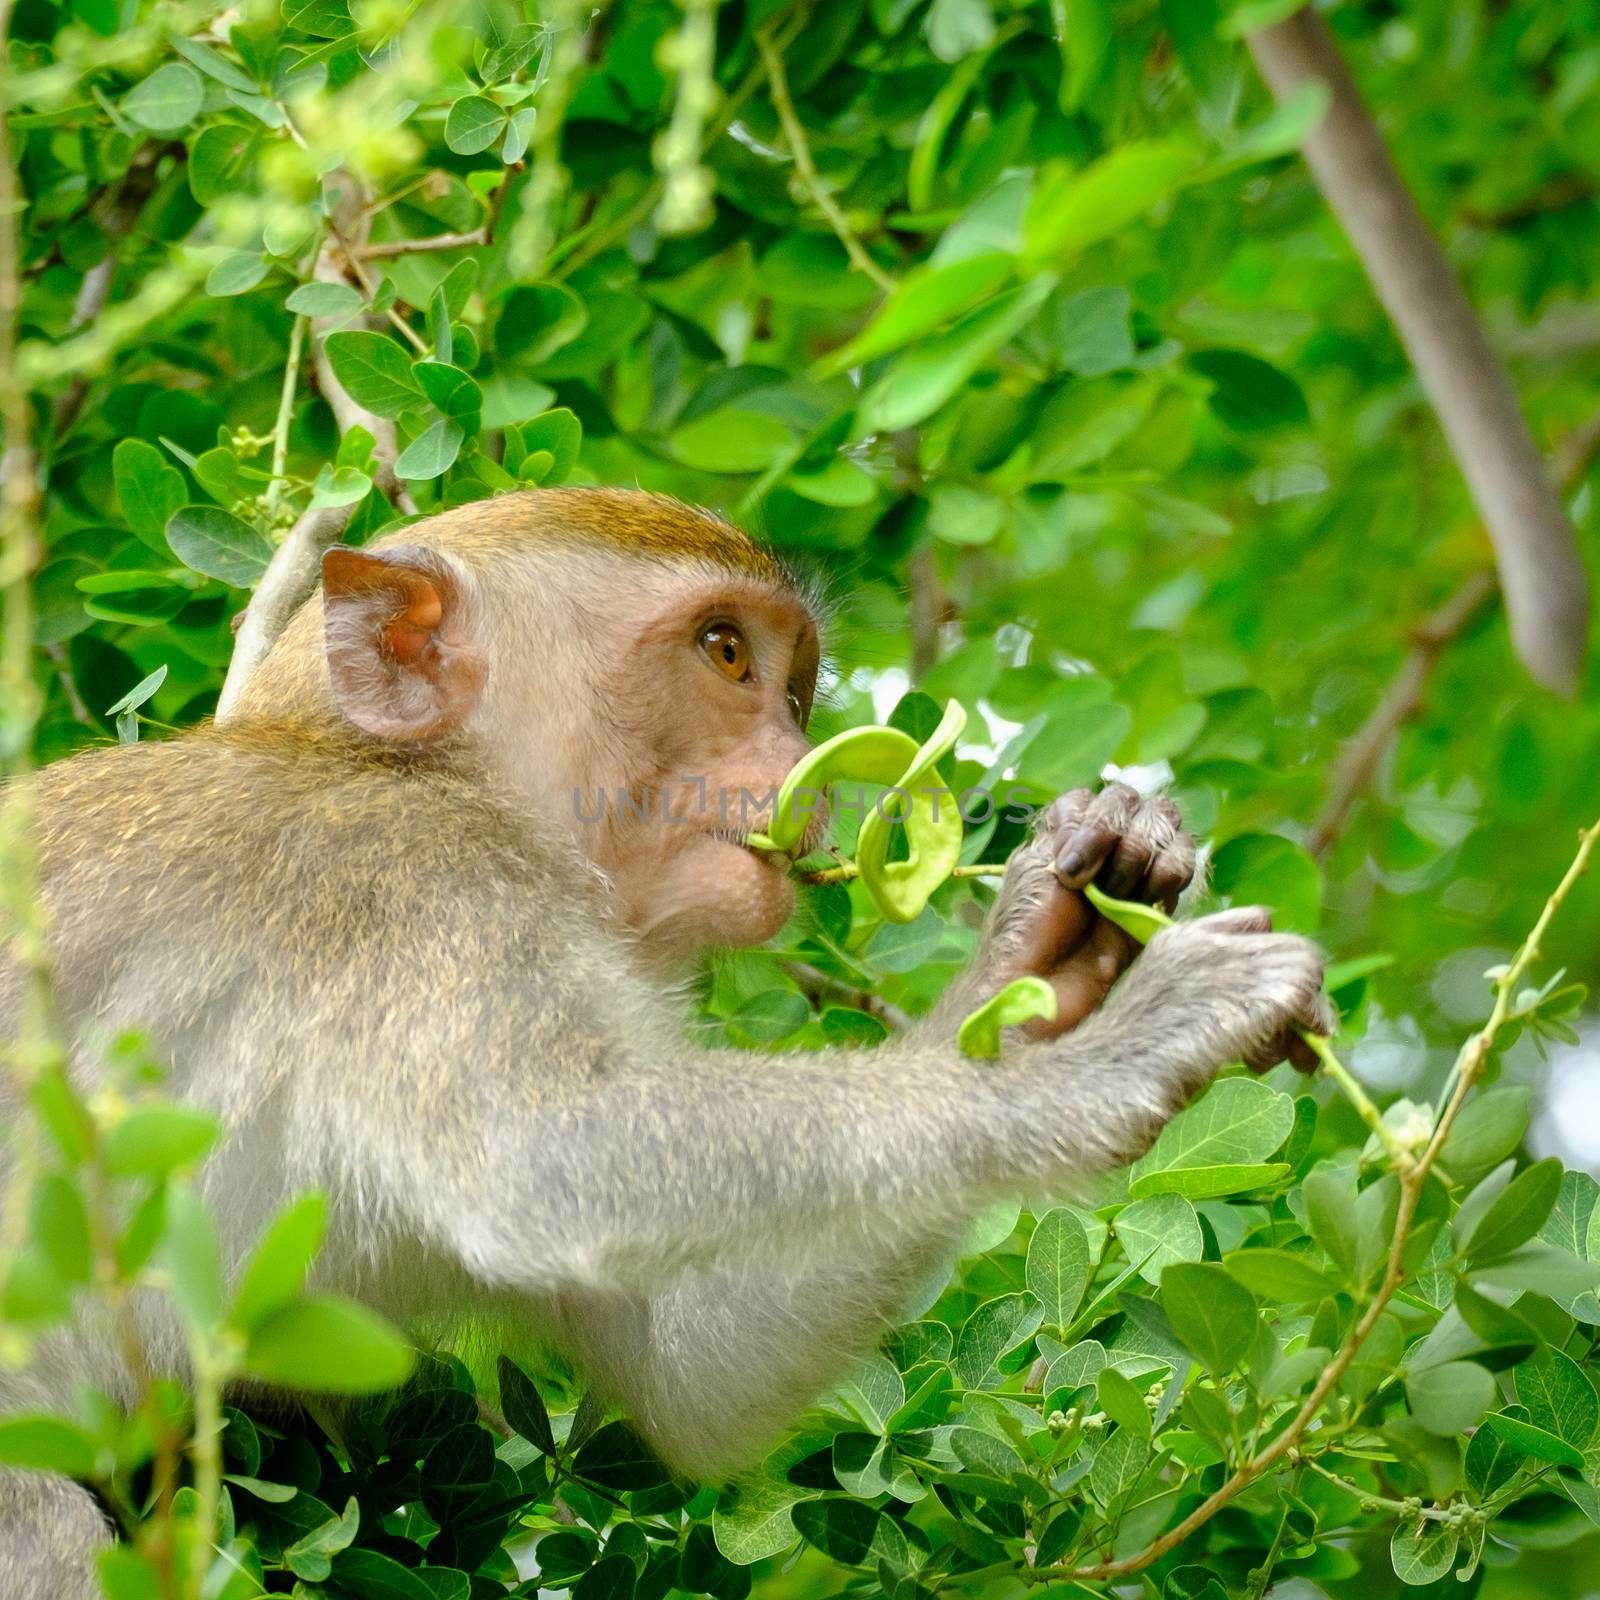 Monkey is eating leaf and sitting on a tree with bokeh trees background lives in a natural forest of Thailand.